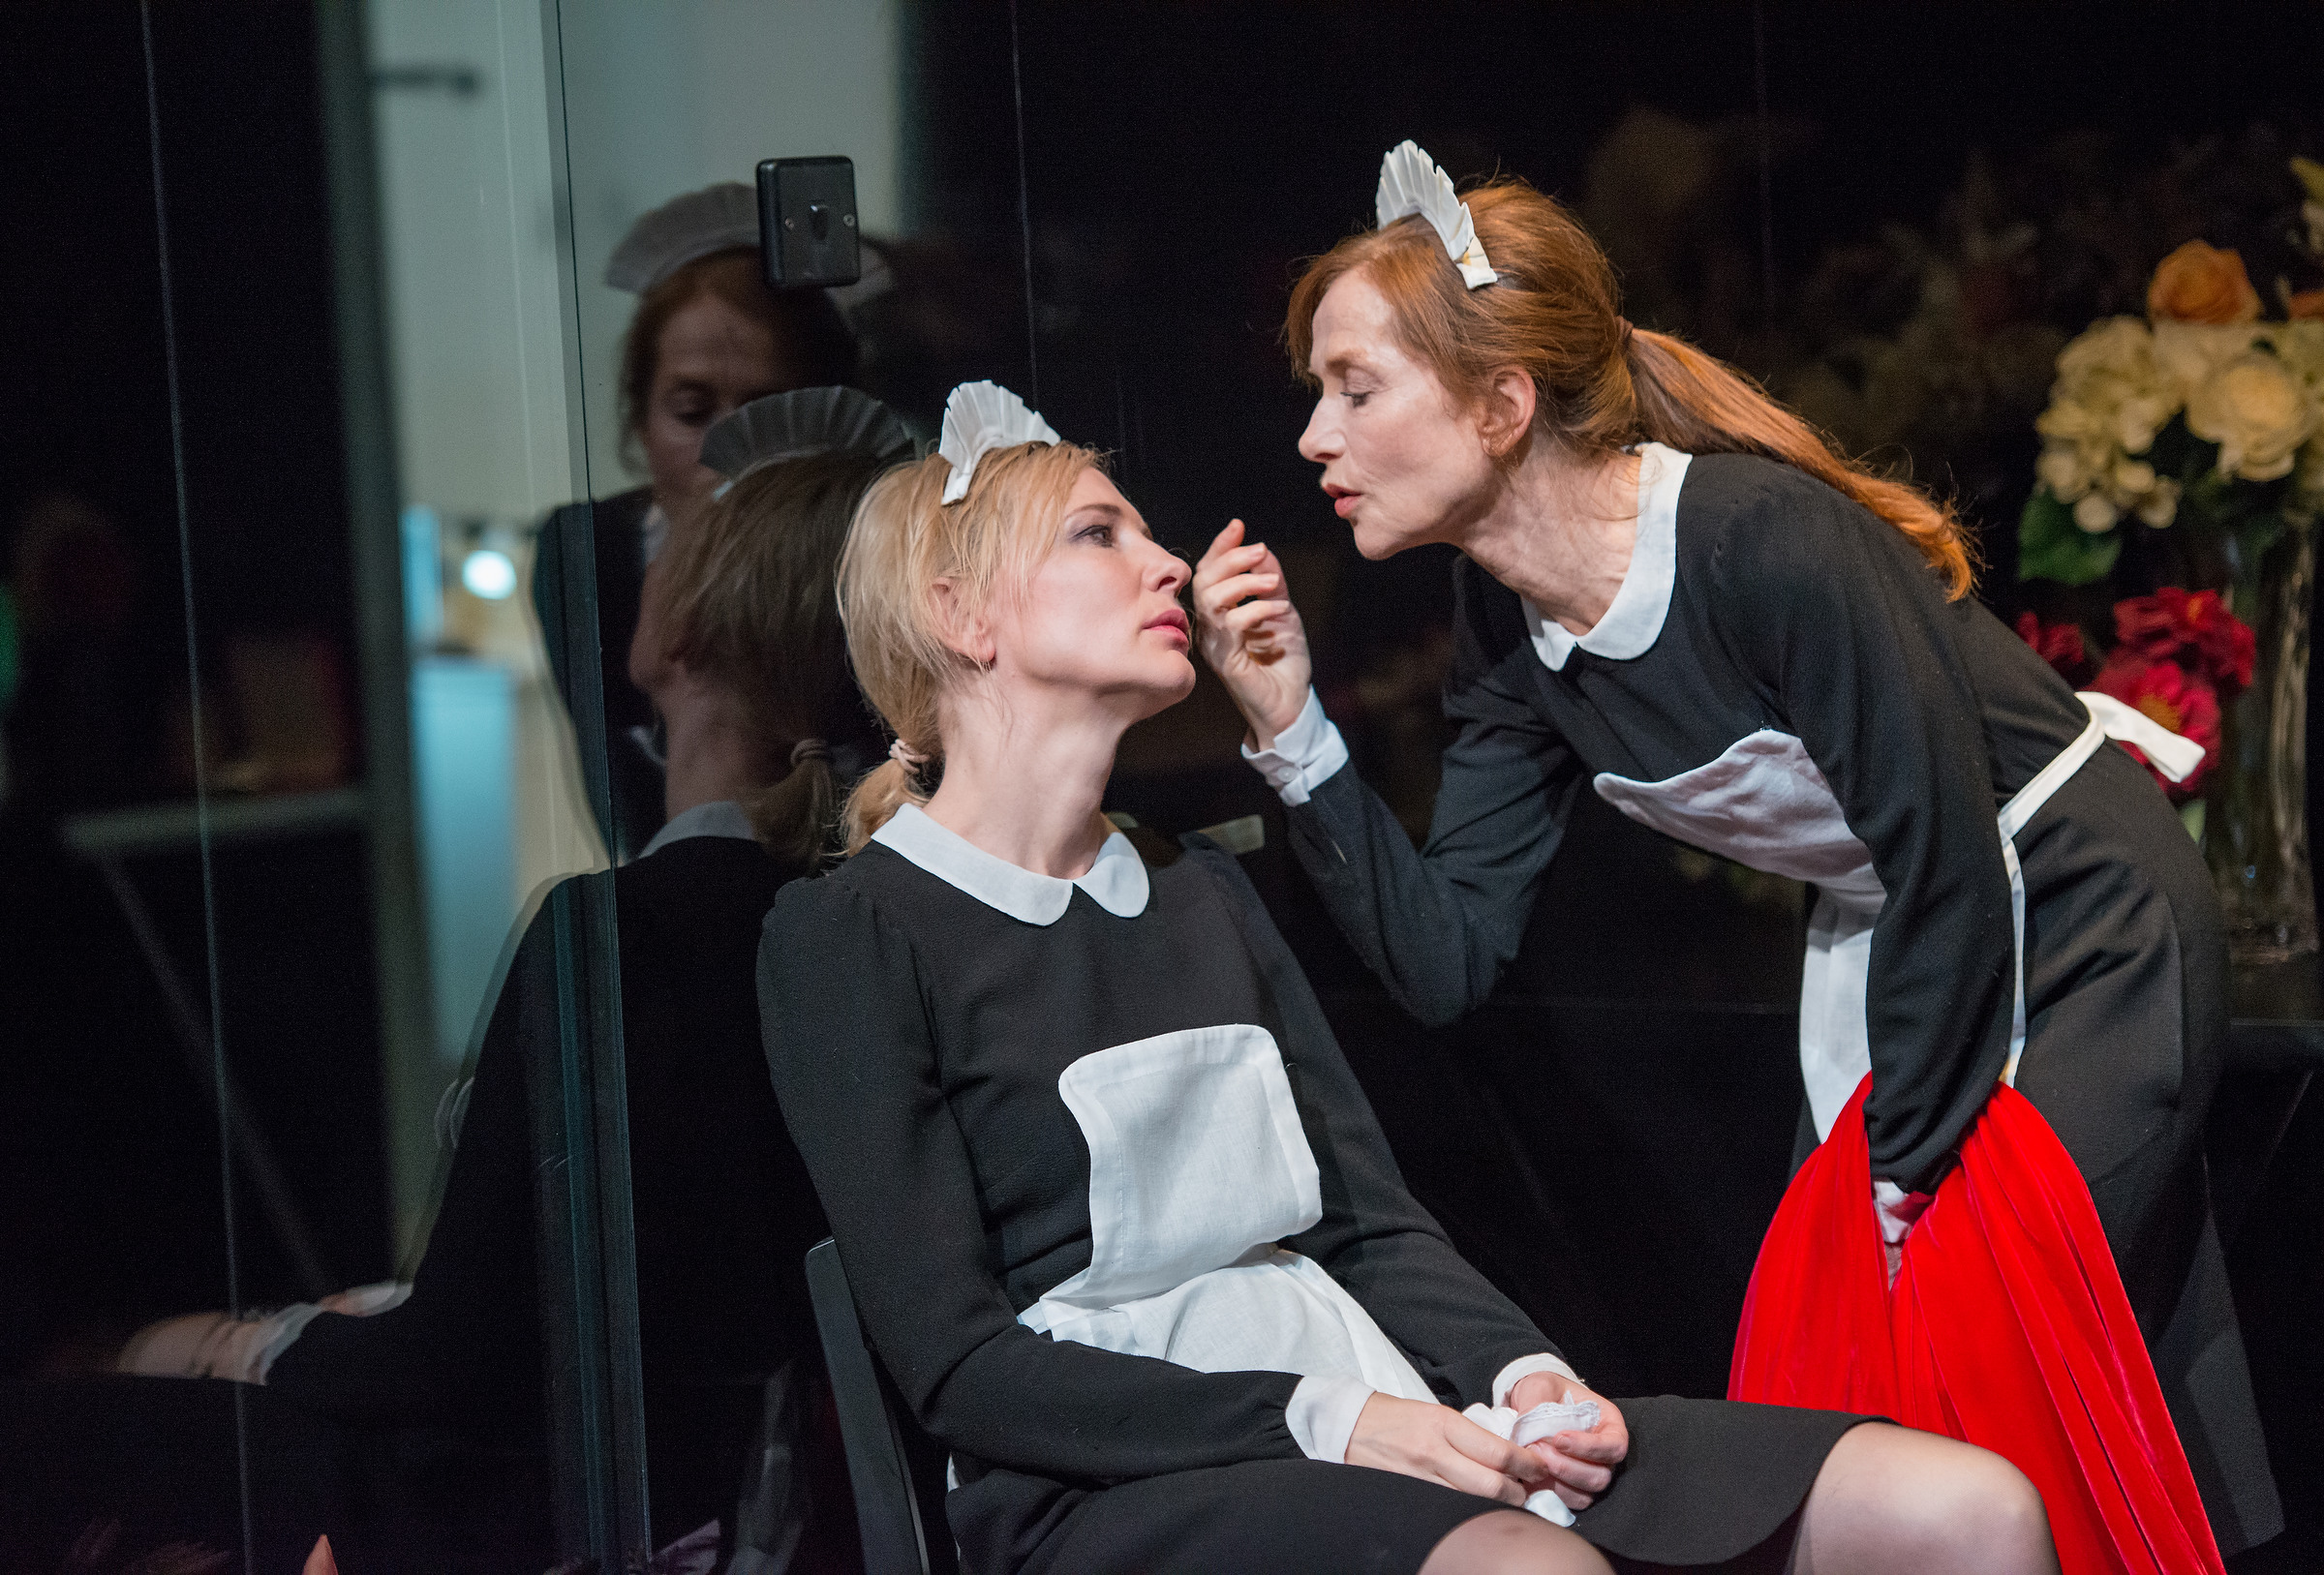 Cate Blanchett, left, and Isabelle Huppert, in a scene from the Sydney Theatre Company's production of "The Maids,"currently performing at the Lincoln Center Festival in New York. (Stephanie Berger—Lincoln Center Festival/AP)